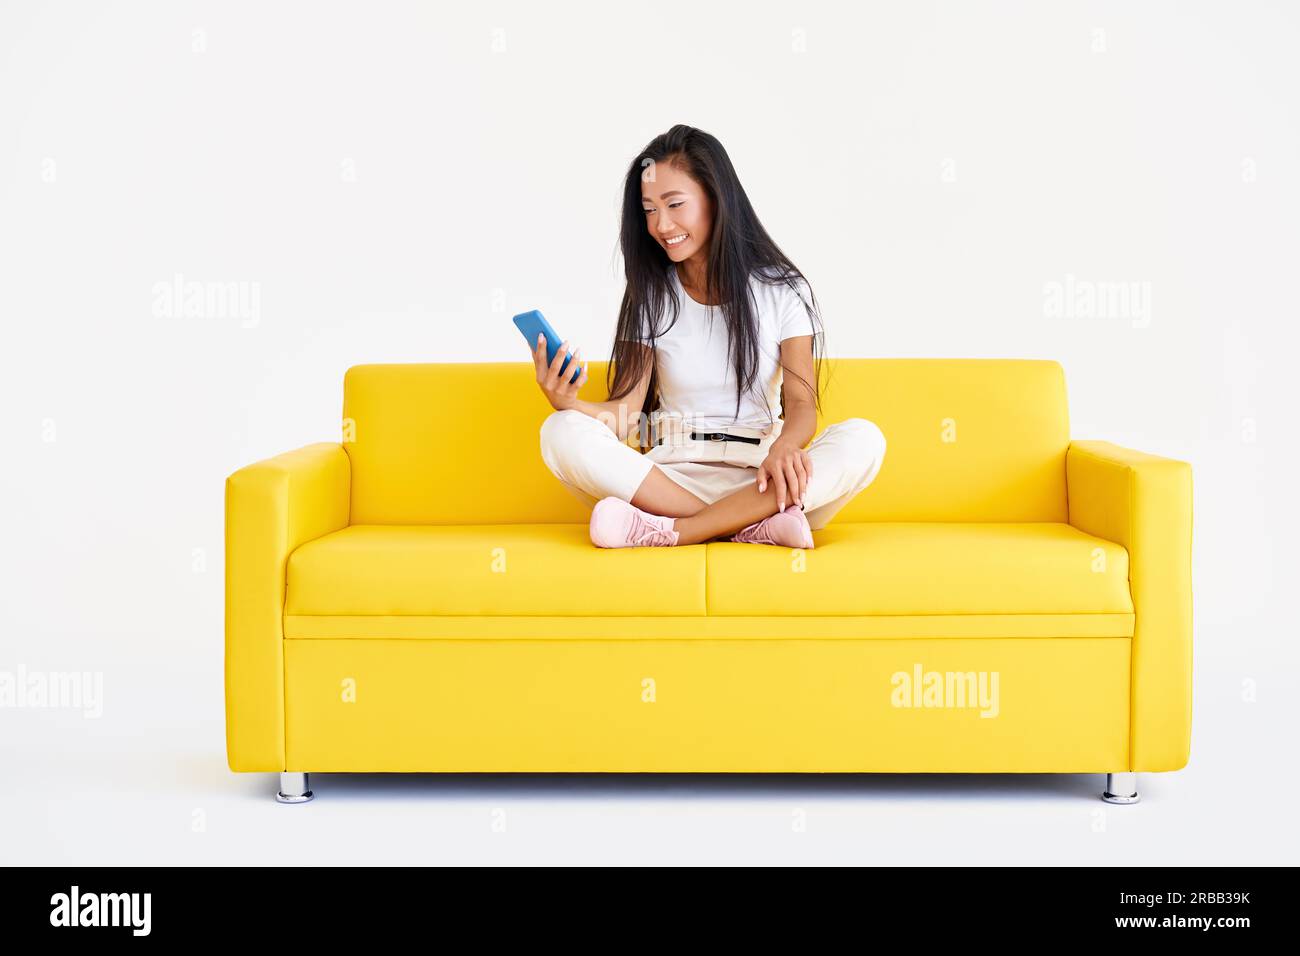 Smiling asian woman holding smartphone browses internet and scrolls news sitting on yellow couch on white background. Technology, communication Stock Photo